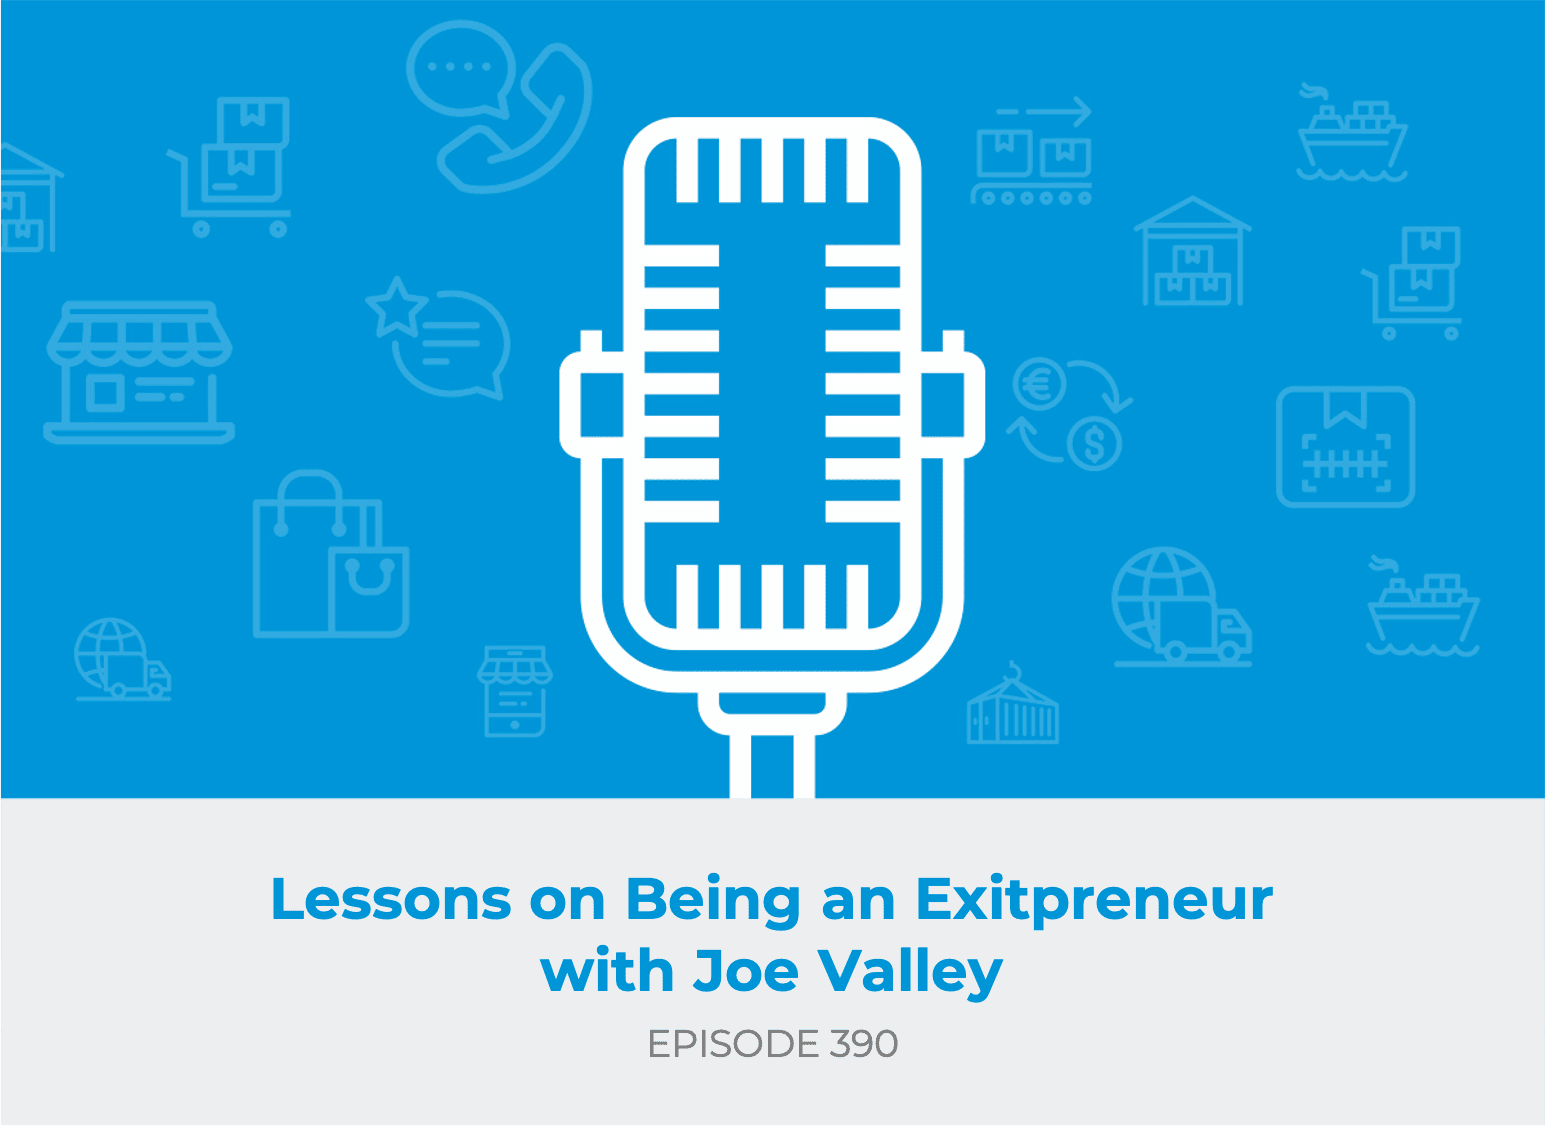 Lessons on Being an Exitpreneur with Joe Valley